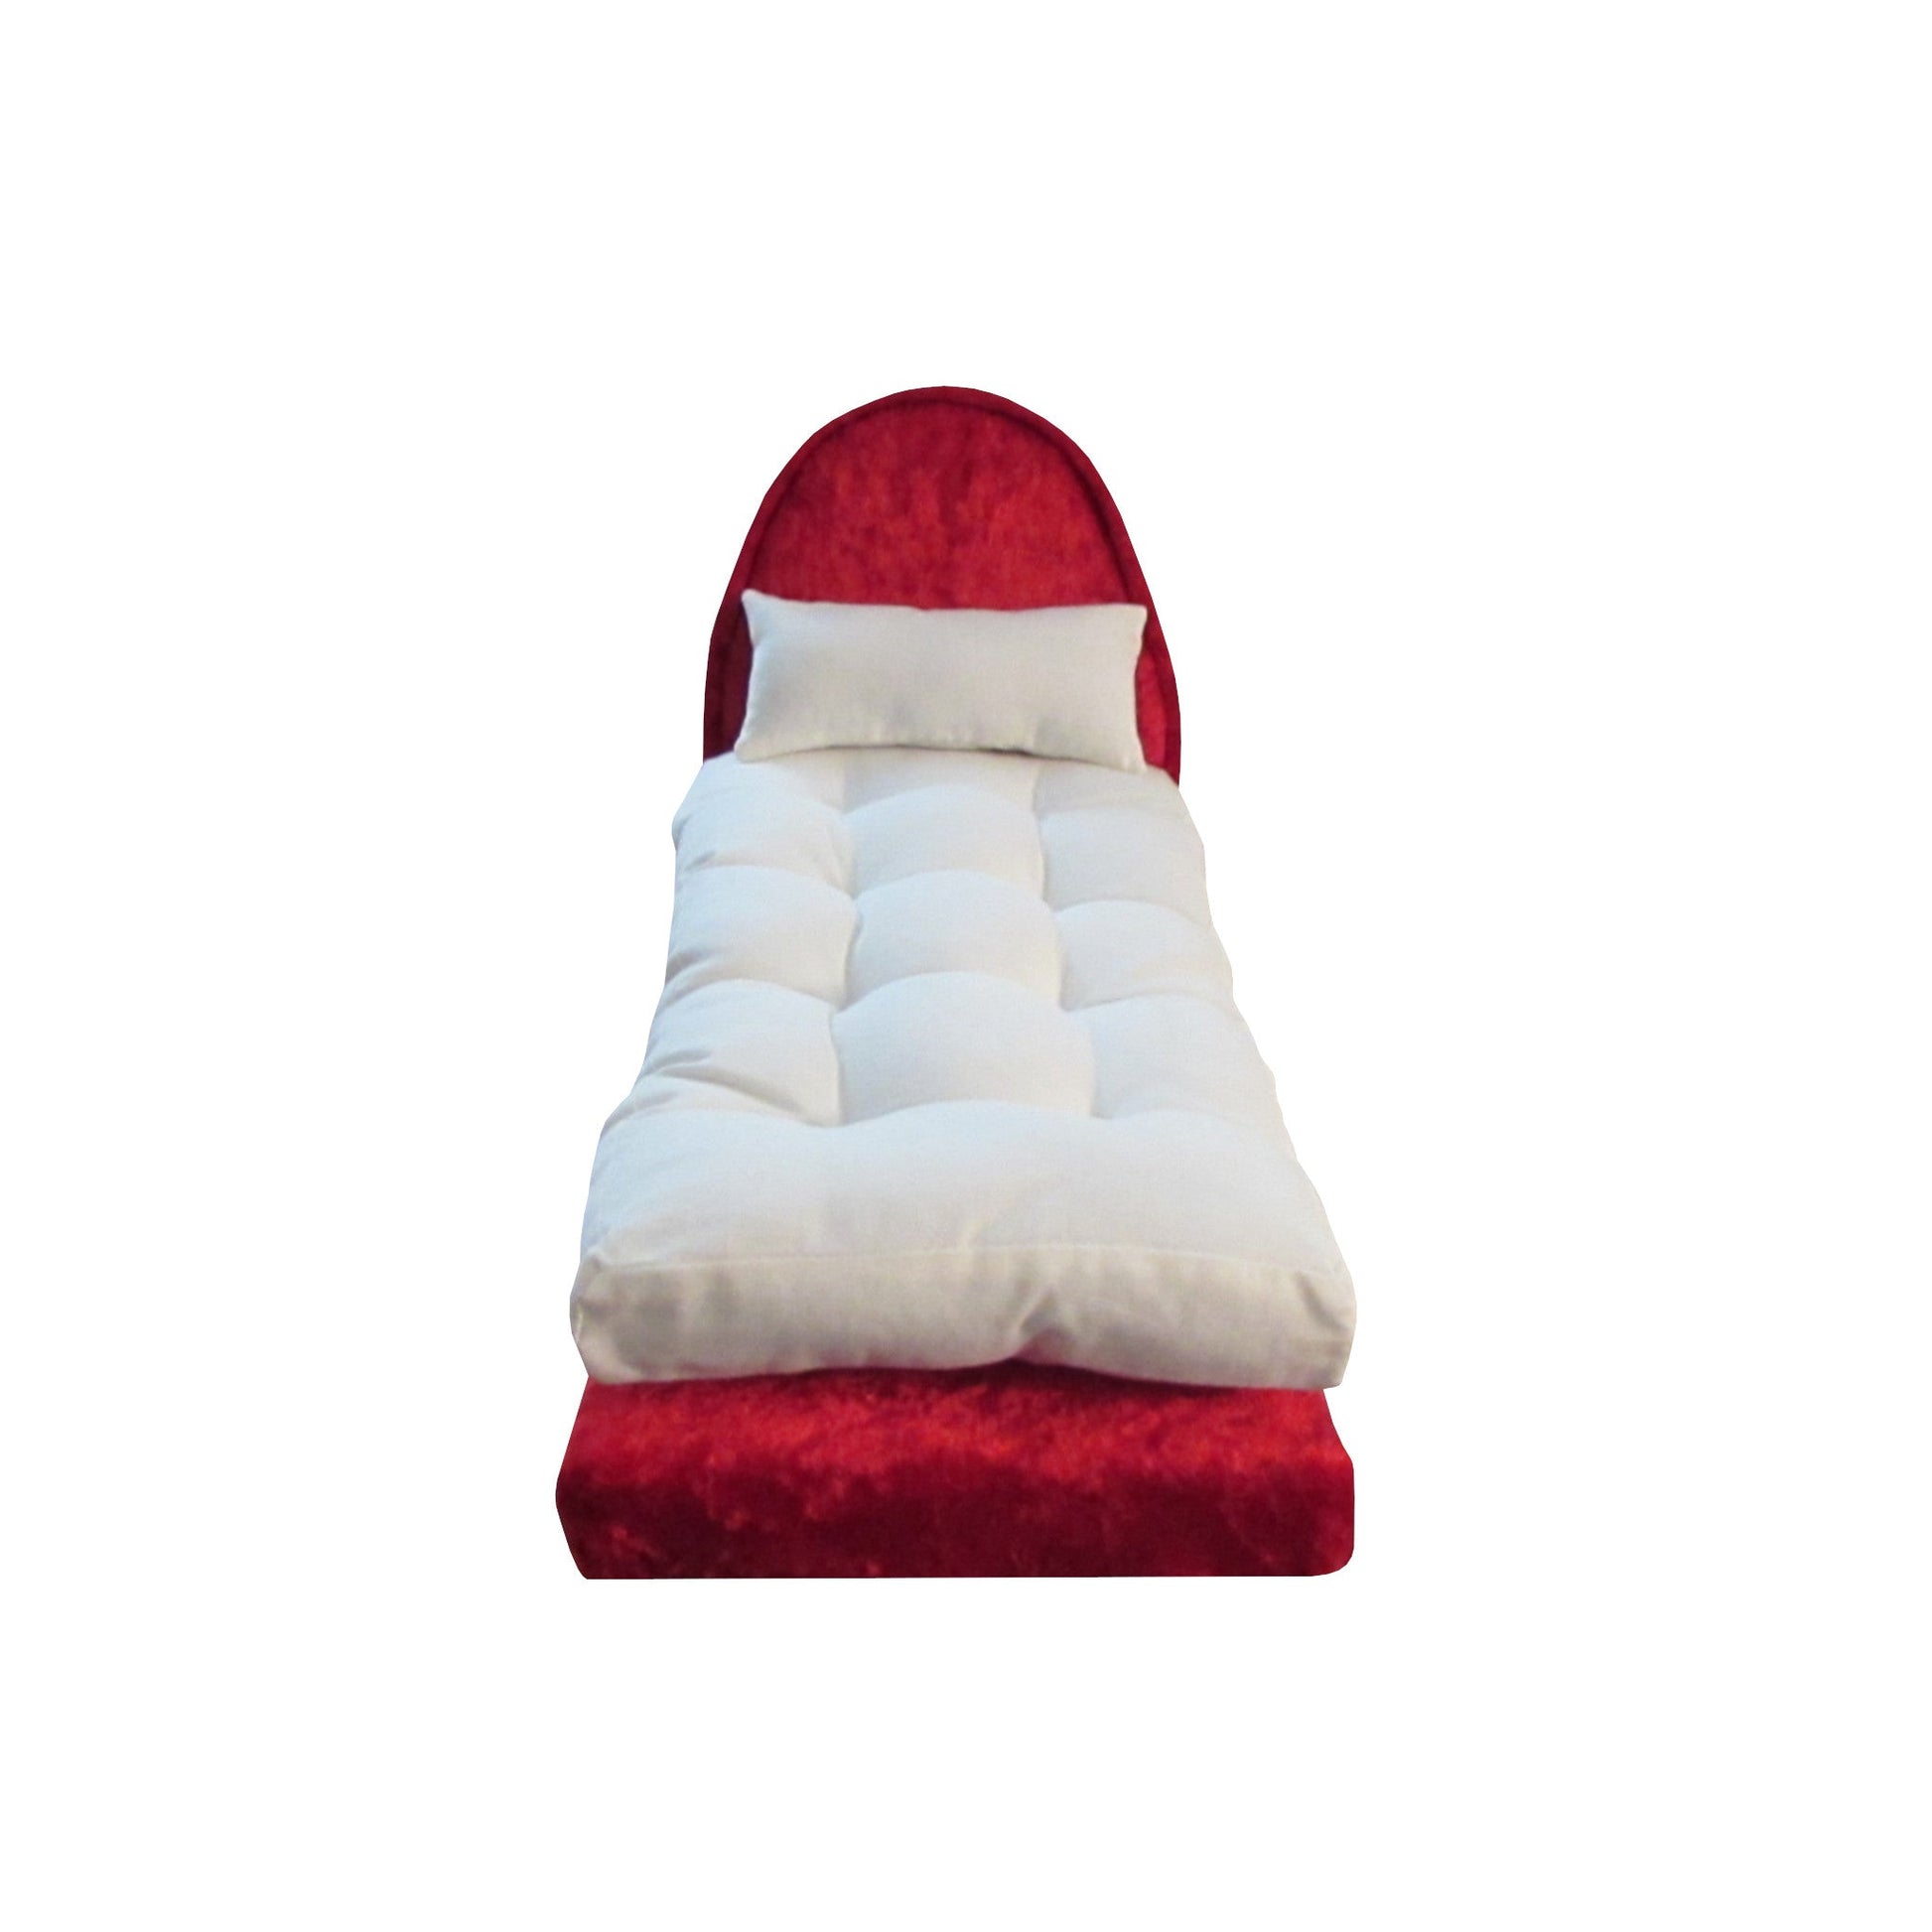 Red Crushed Velvet Doll Bed, Pillow, and Mattress for 11.5-inch and 12-inch dolls Second view